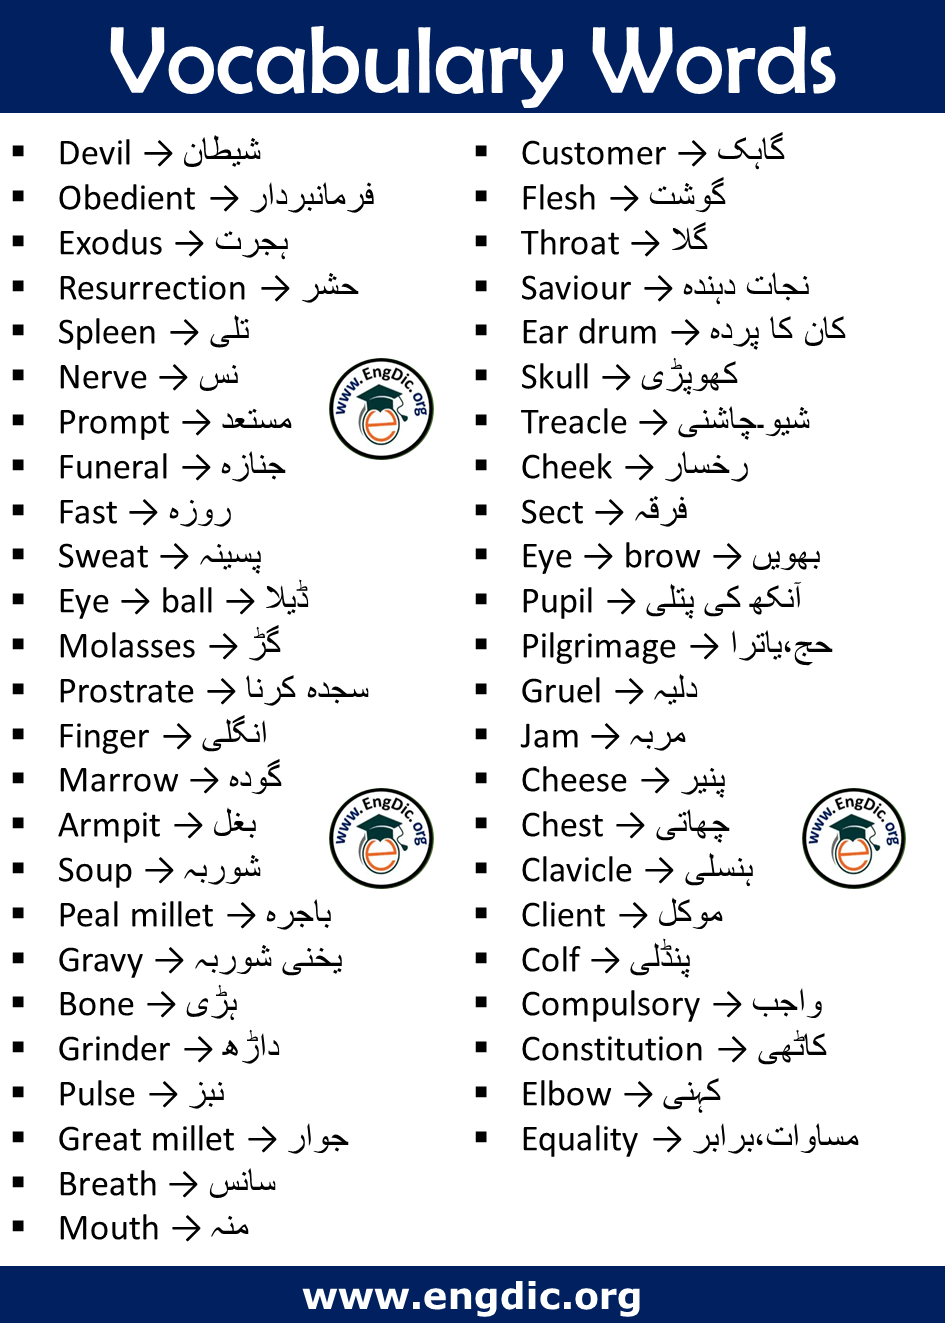 Vocabulary Words with meaning in Urdu